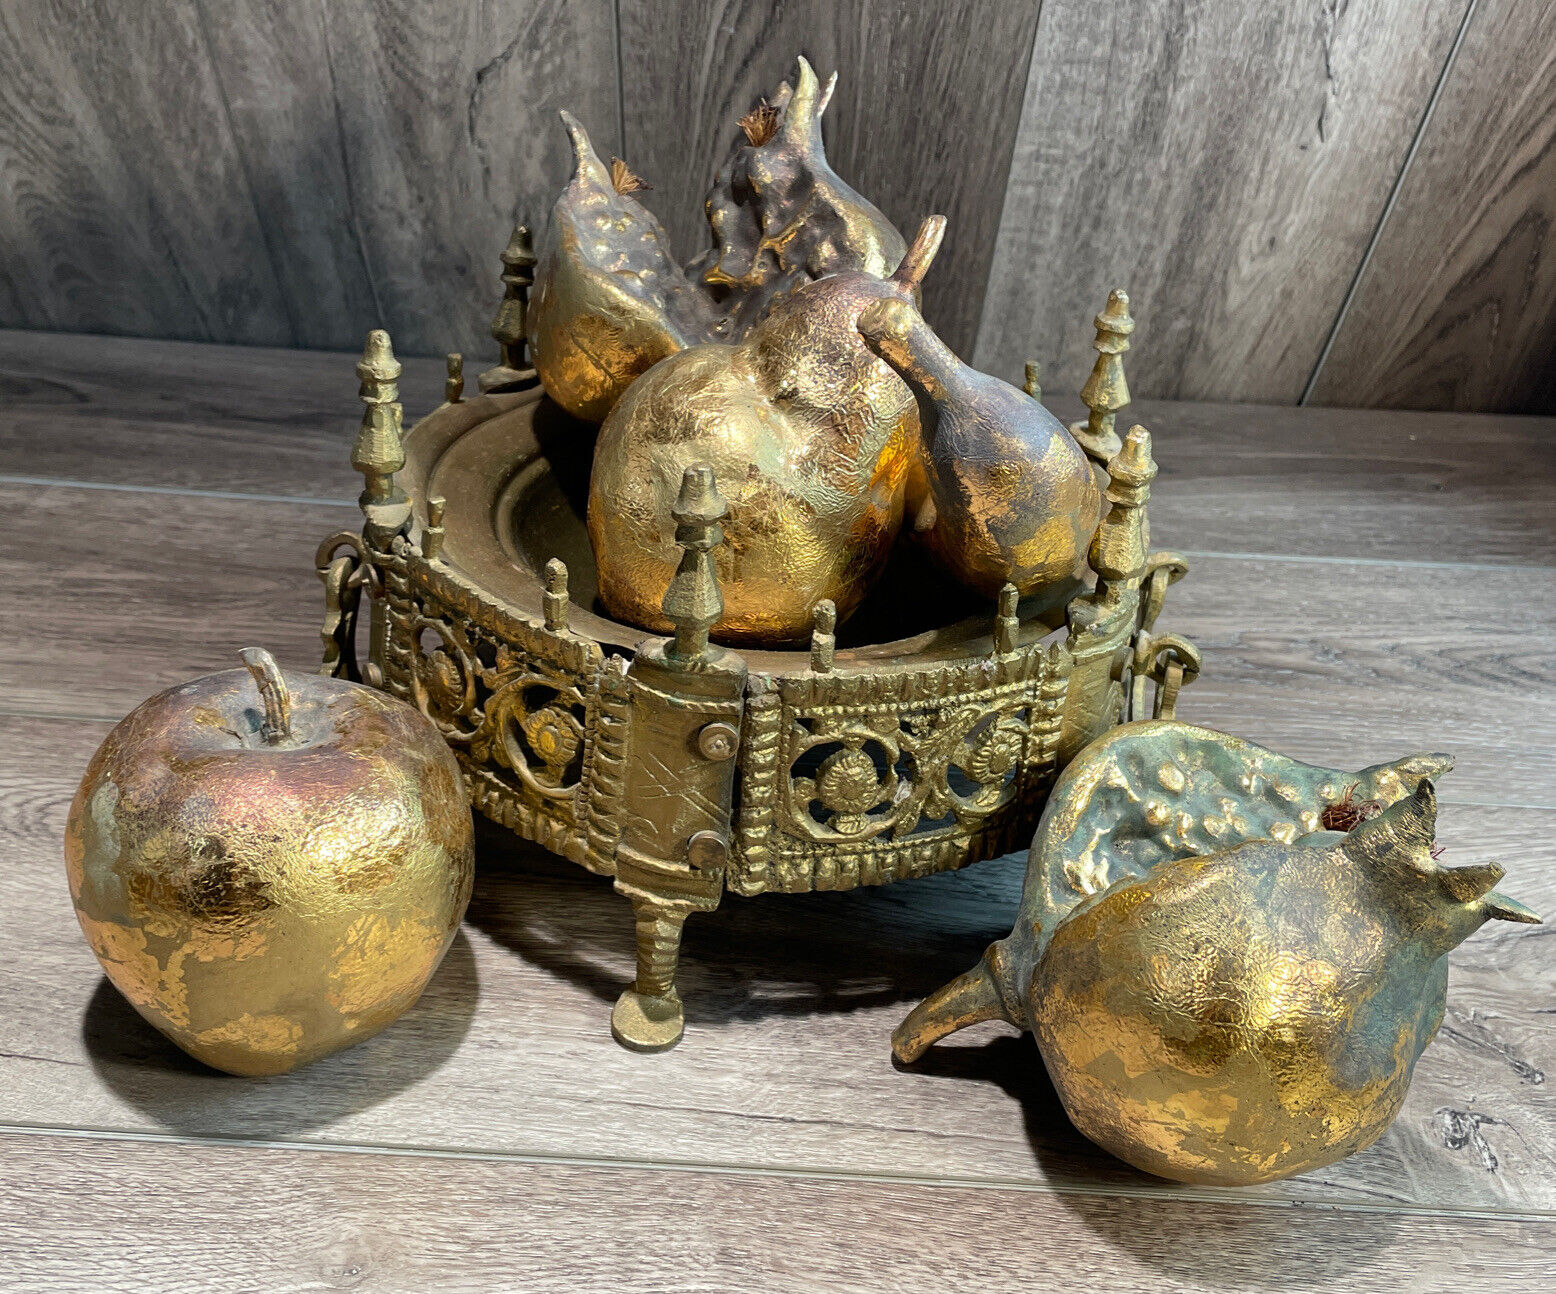 Vintage Ornate Brass Gold Fruit Centerpiece - Footed Tray Handles Home Decor